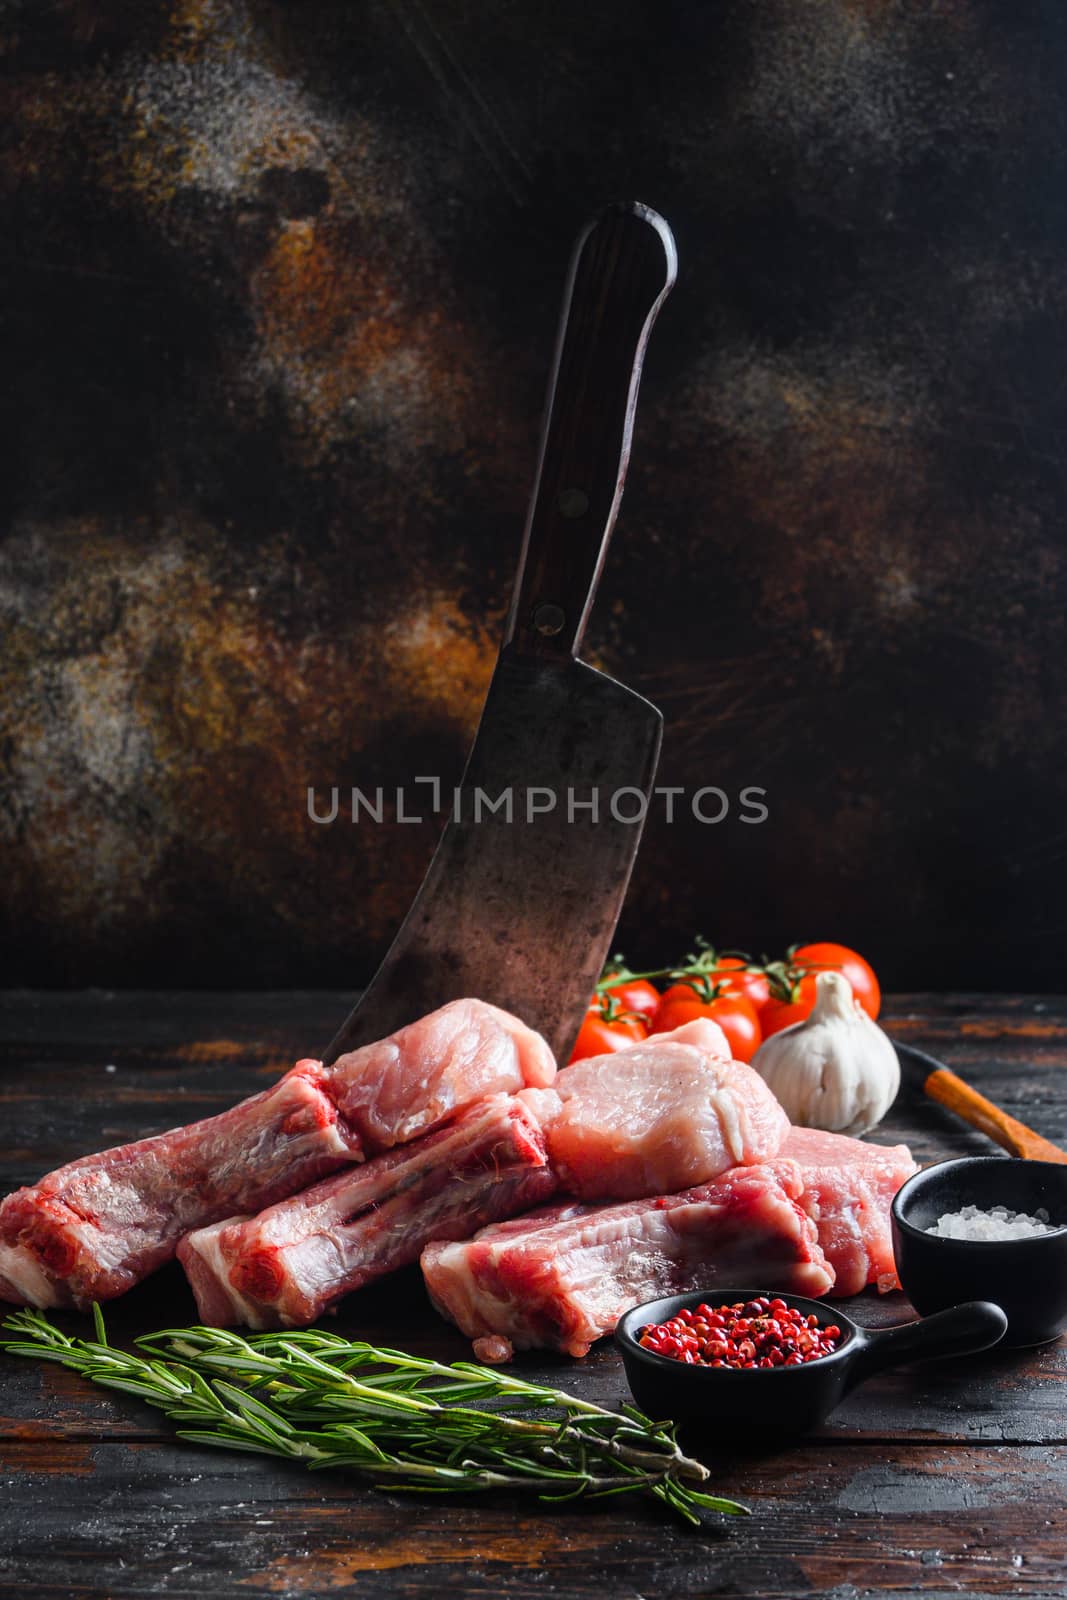 Fresh raw pork meat from organic farm with spices: pepper, salt, bay leaf. Butcher chopping cleaver in wood table over rustic wood and metal Food background side view .